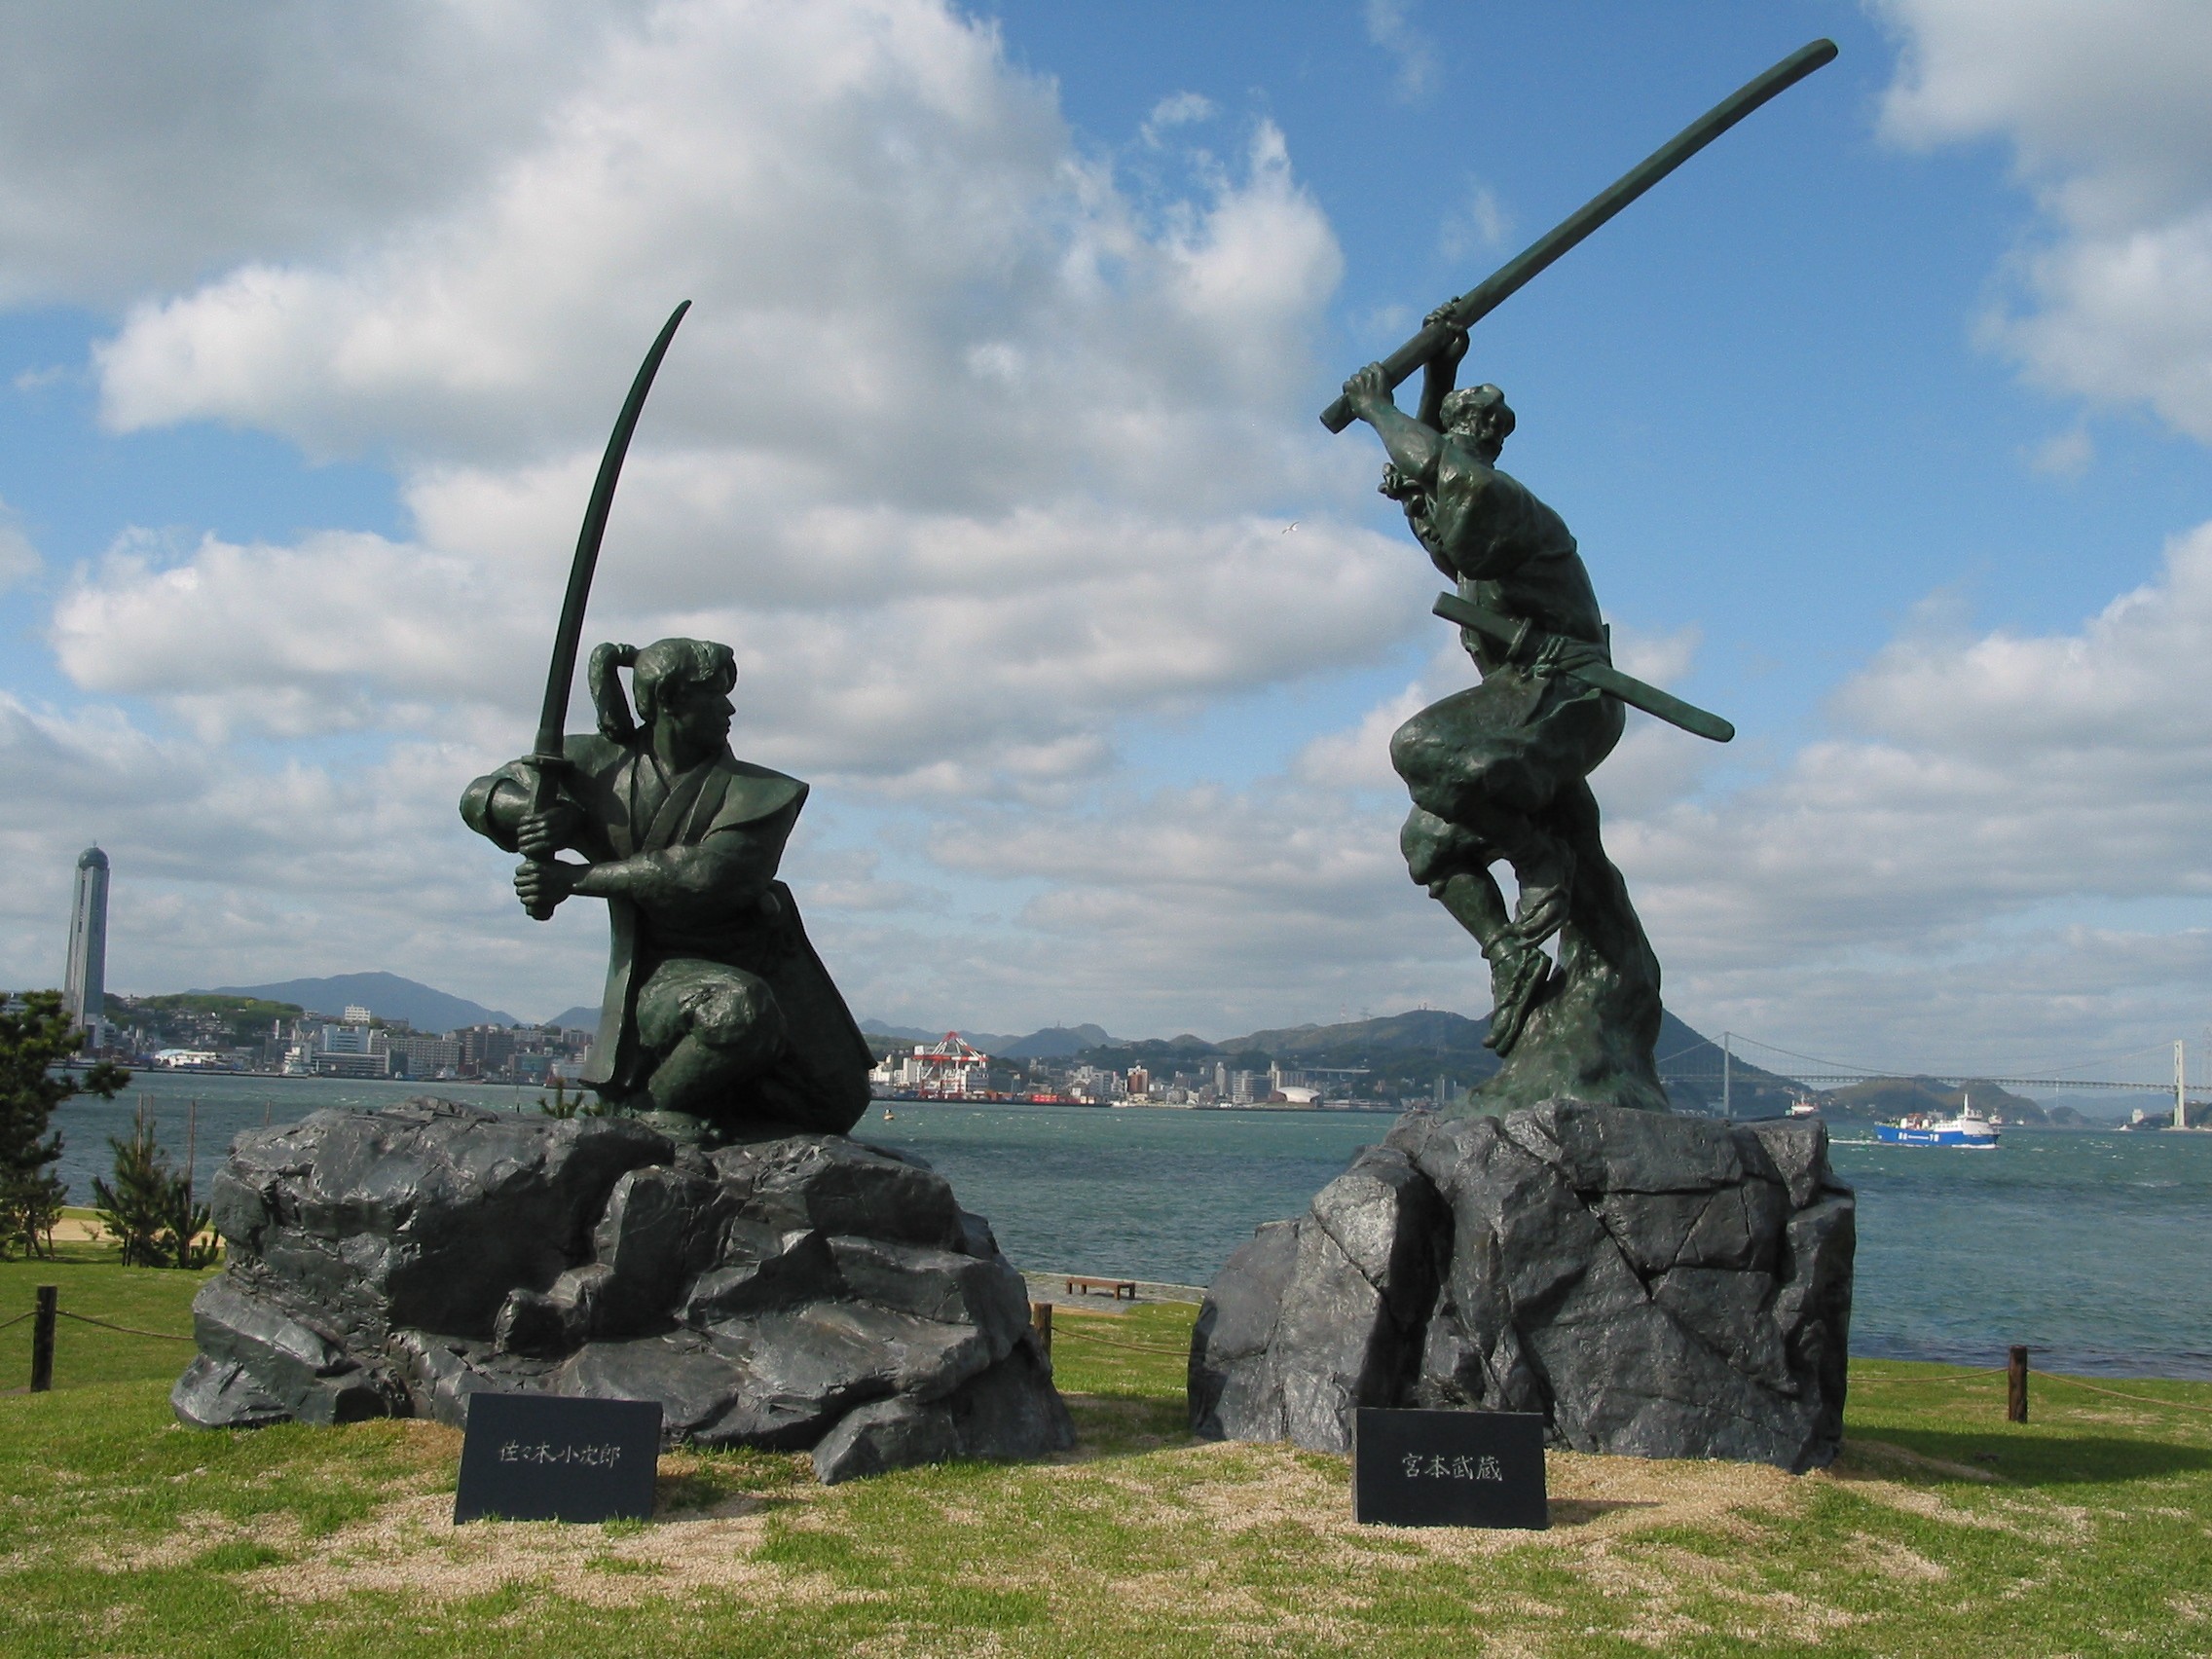 Shimonoseki is the place where the historical battles took place